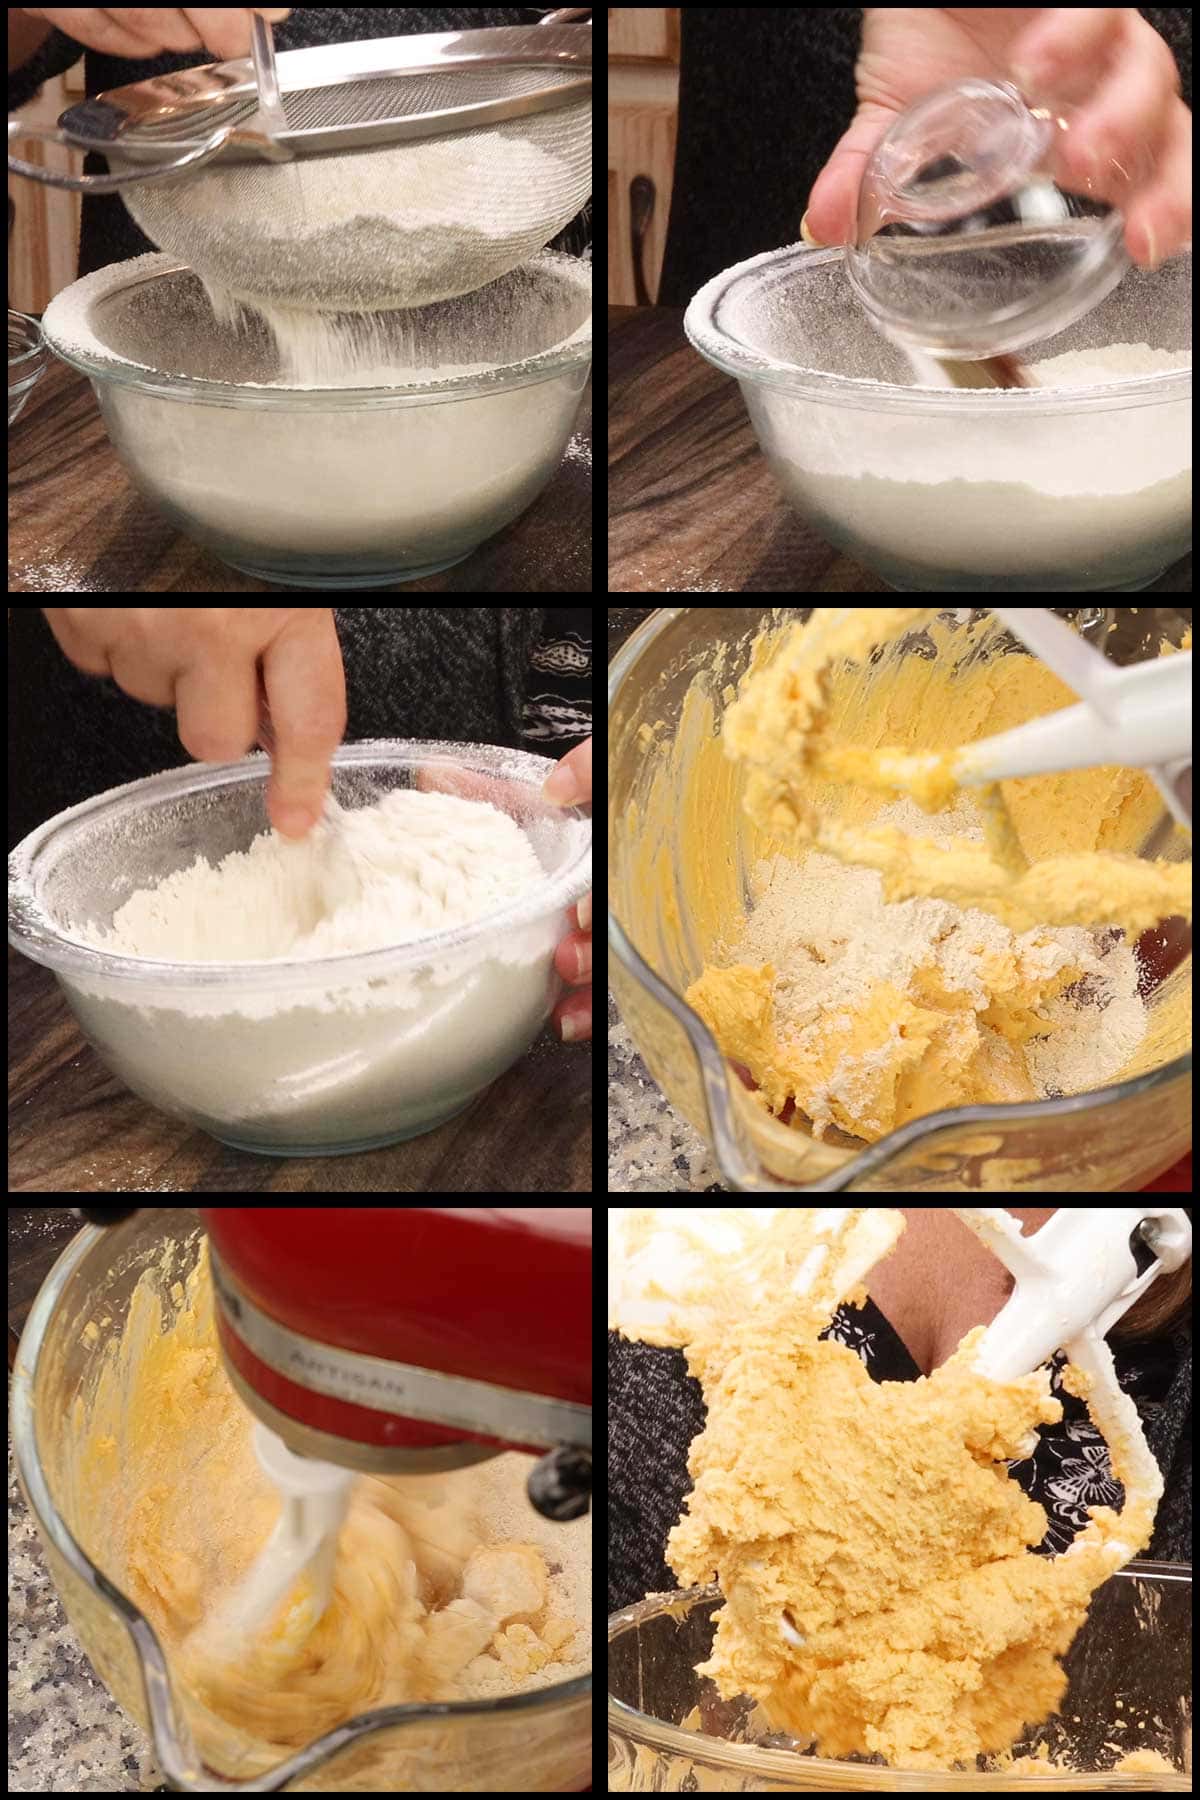 mixing the flour and spices into the cheese mixture with stand mixer